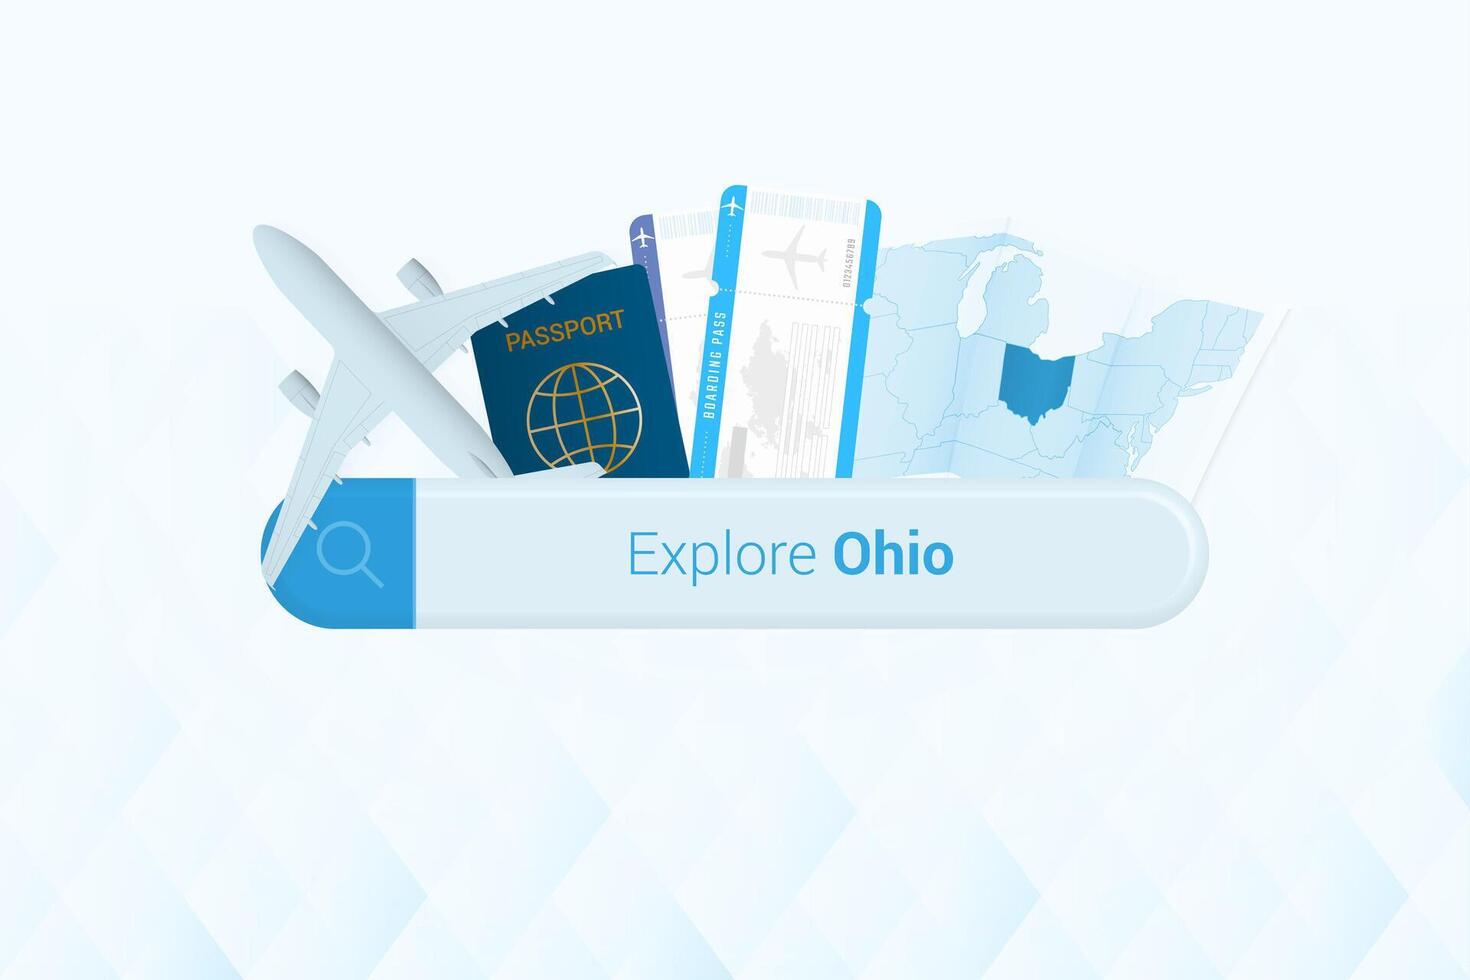 Searching tickets to Ohio or travel destination in Ohio. Searching bar with airplane, passport, boarding pass, tickets and map. vector